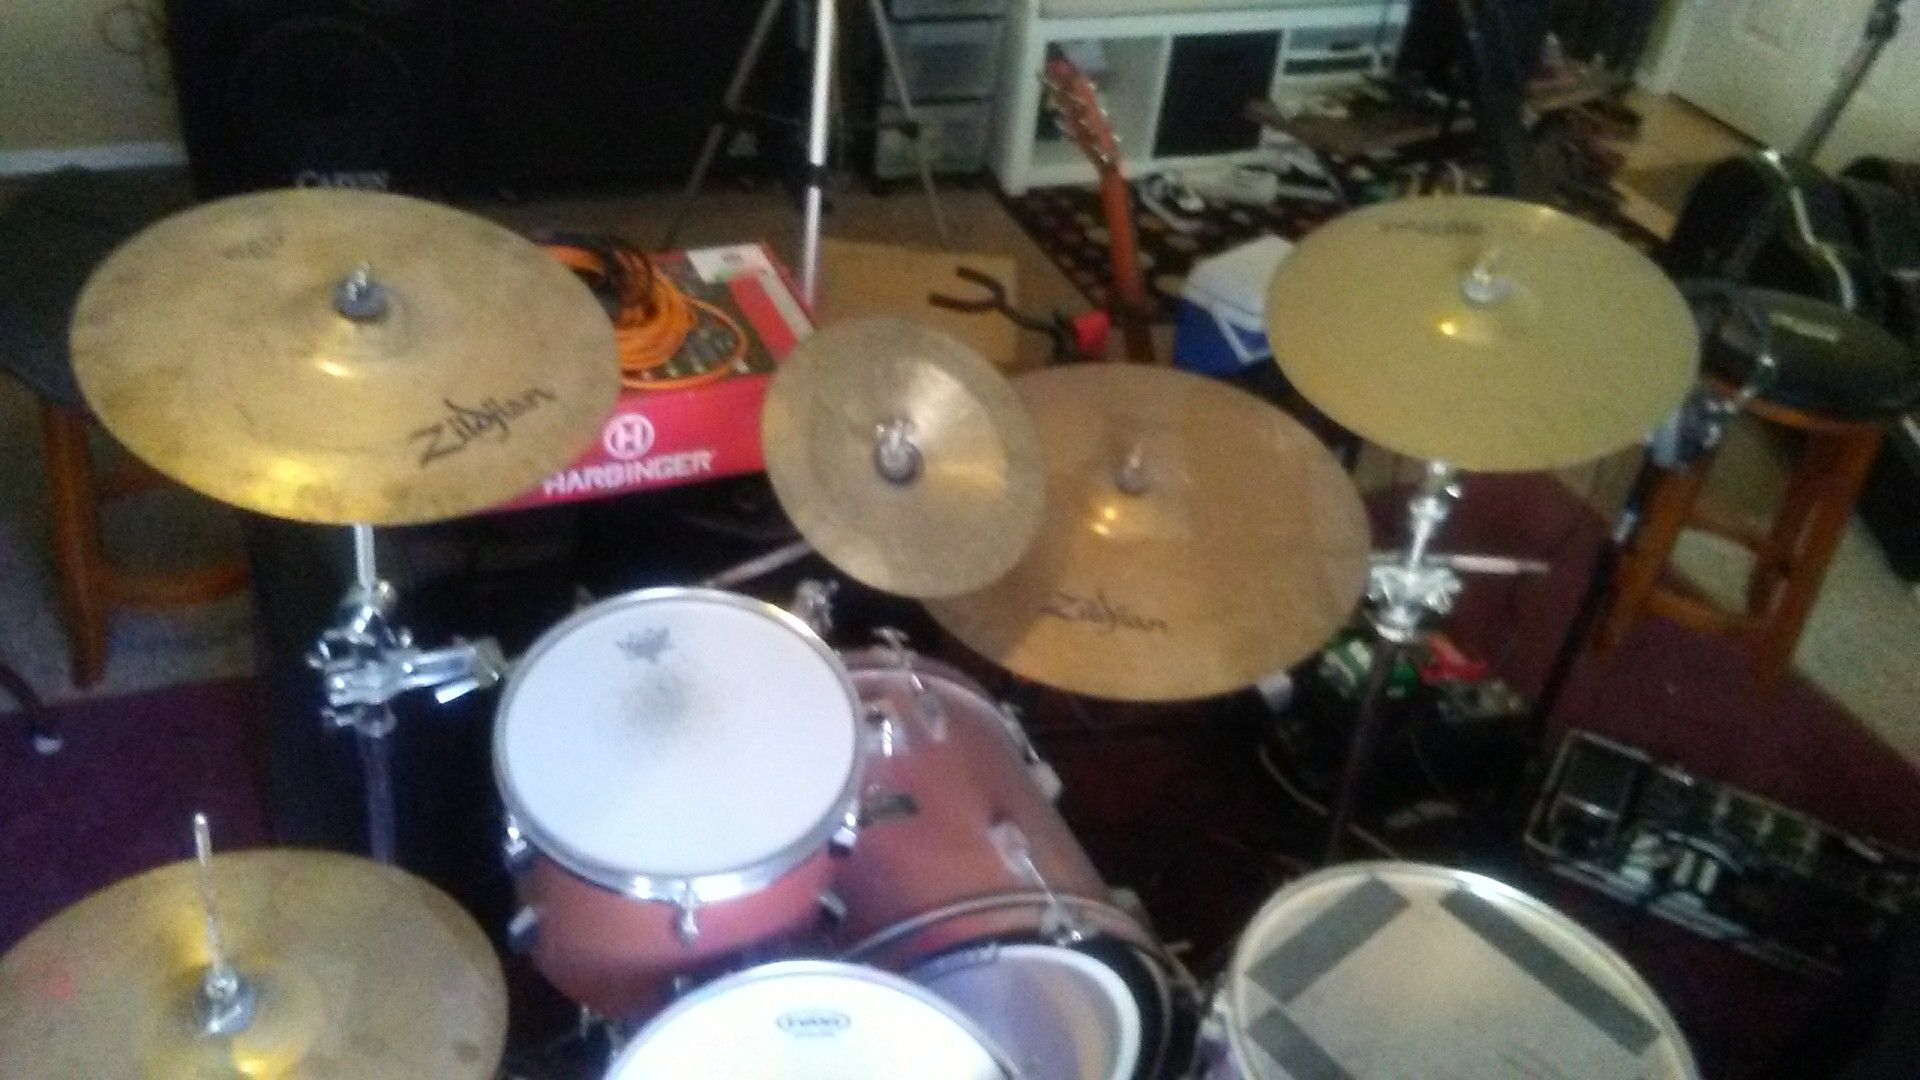 Drum set w/ cymbals and hardware